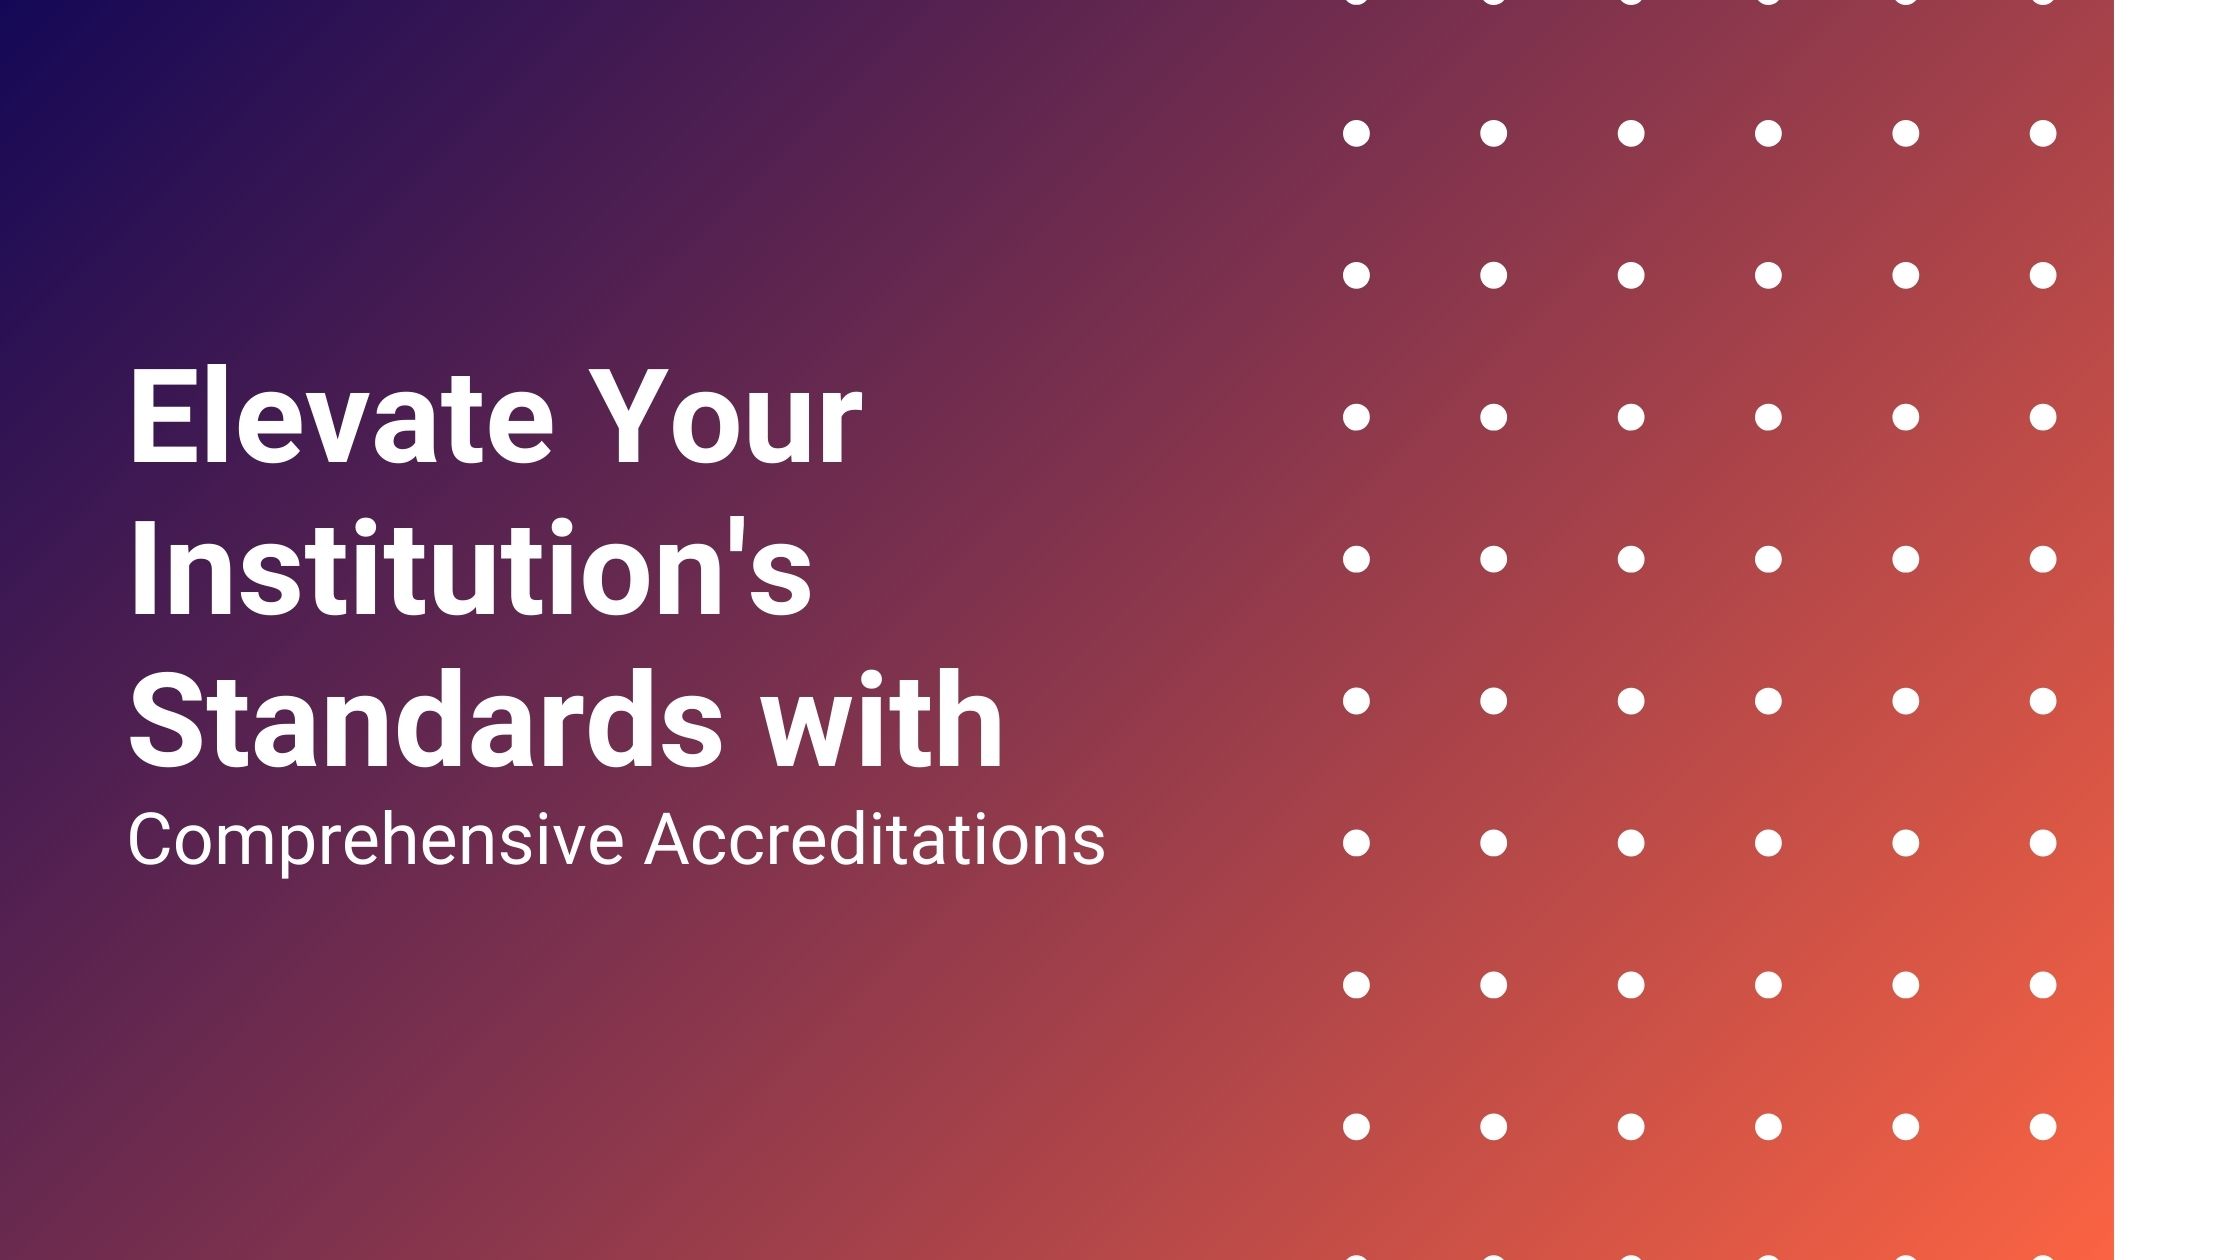 Elevate Your Institution's Standards with Comprehensive Accreditations